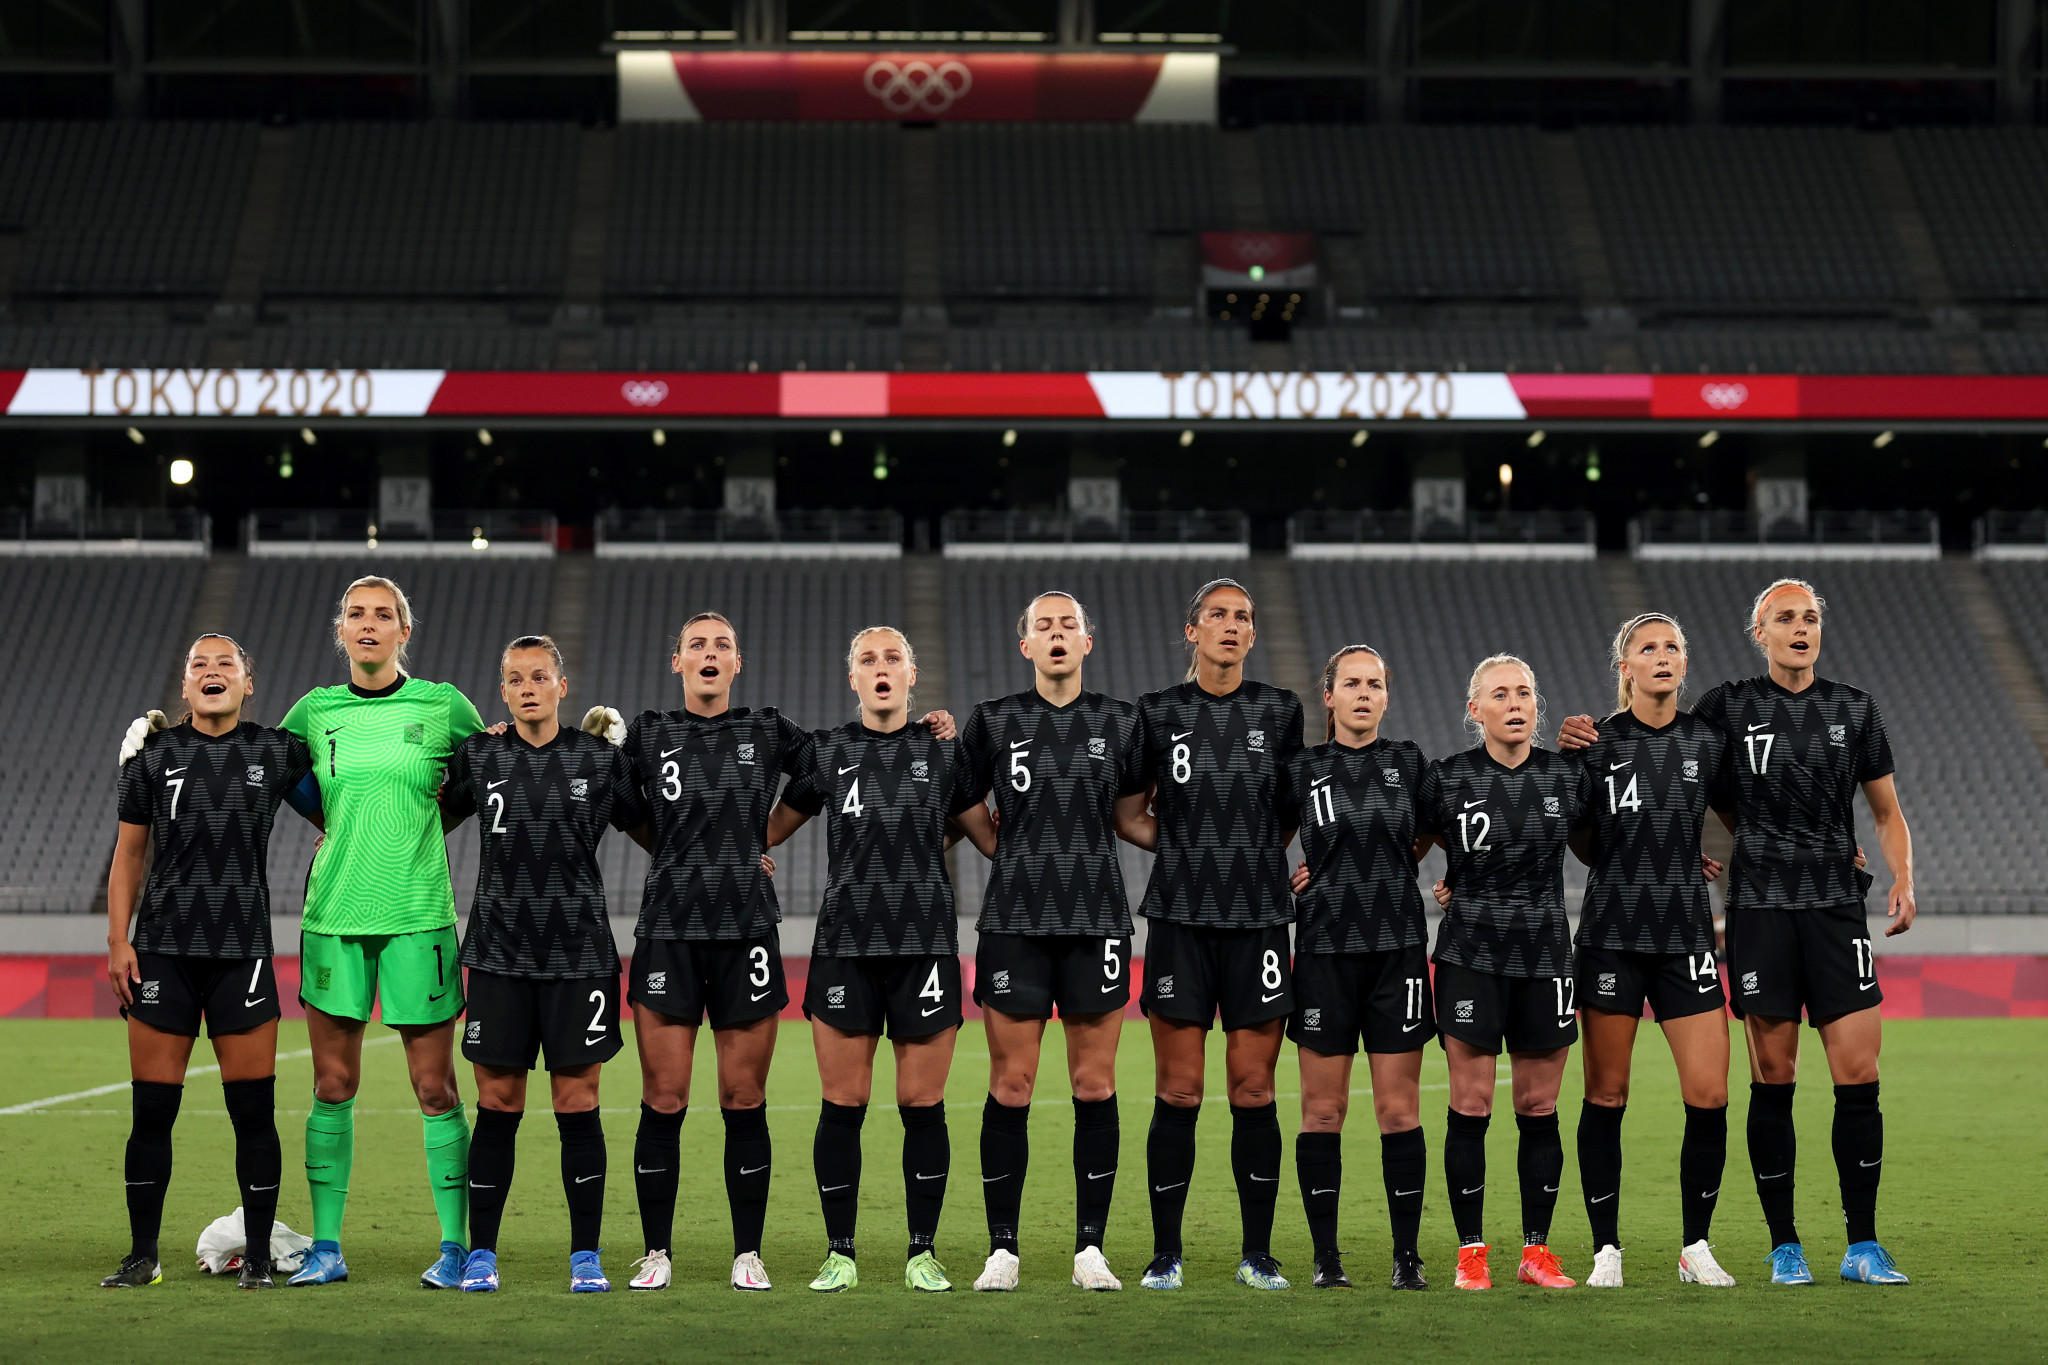 New champions to be crowned at New Zealand-free OFC Women's Nations Cup